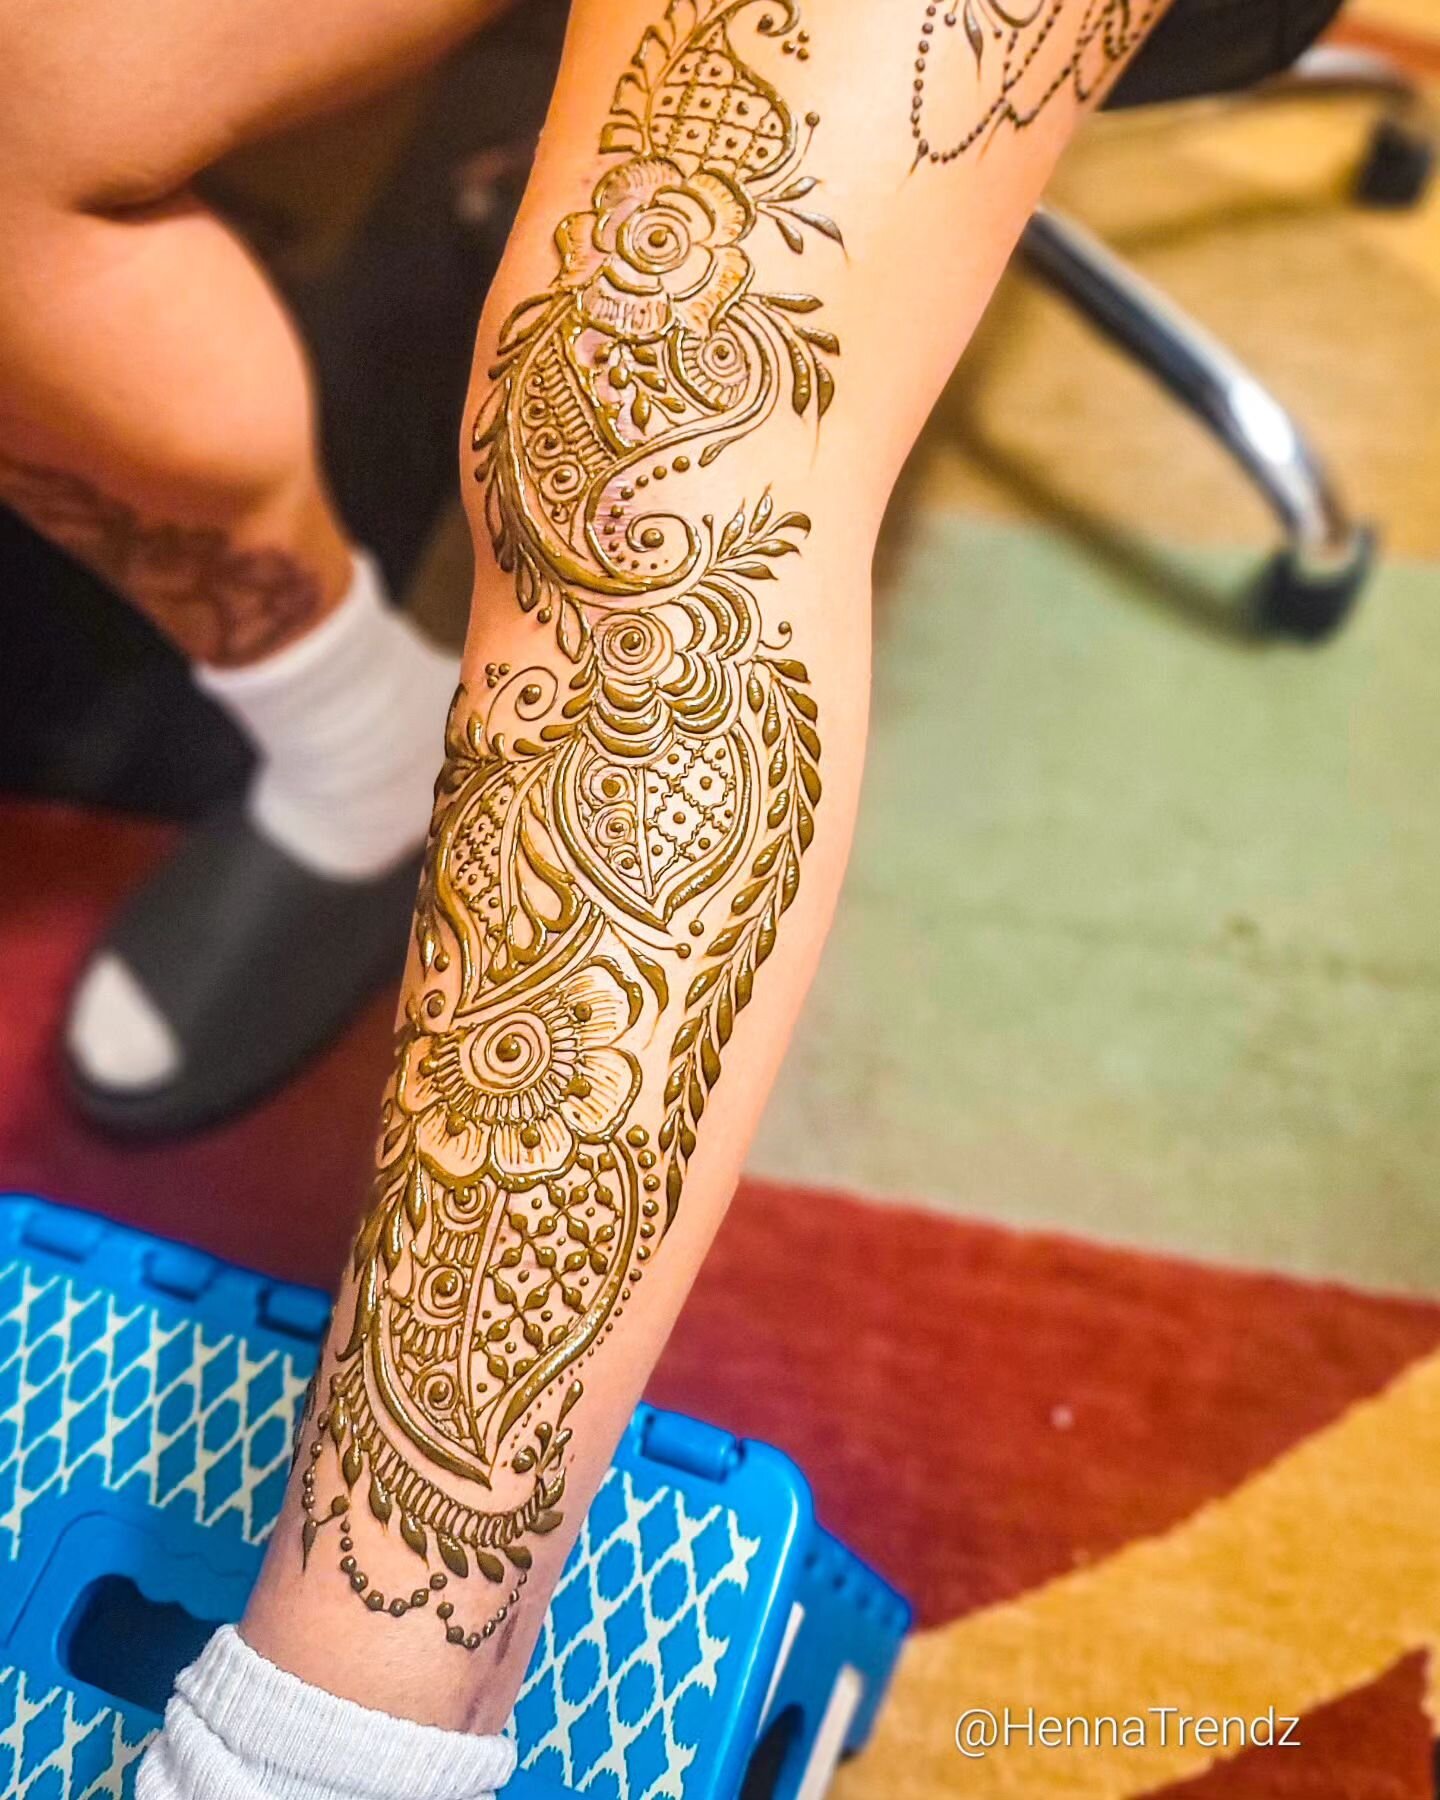 Scar cover up on Alyssa's leg. Not my story to tell, but there is a lot of strength, recovery, and resolve my client has dealt with. 
There is so much we have to be grateful for❤️❤️❤️
 

FOLLOW @hennatrendz
YOUTUBE: HennaTrendz

💖💖Weekends are the 